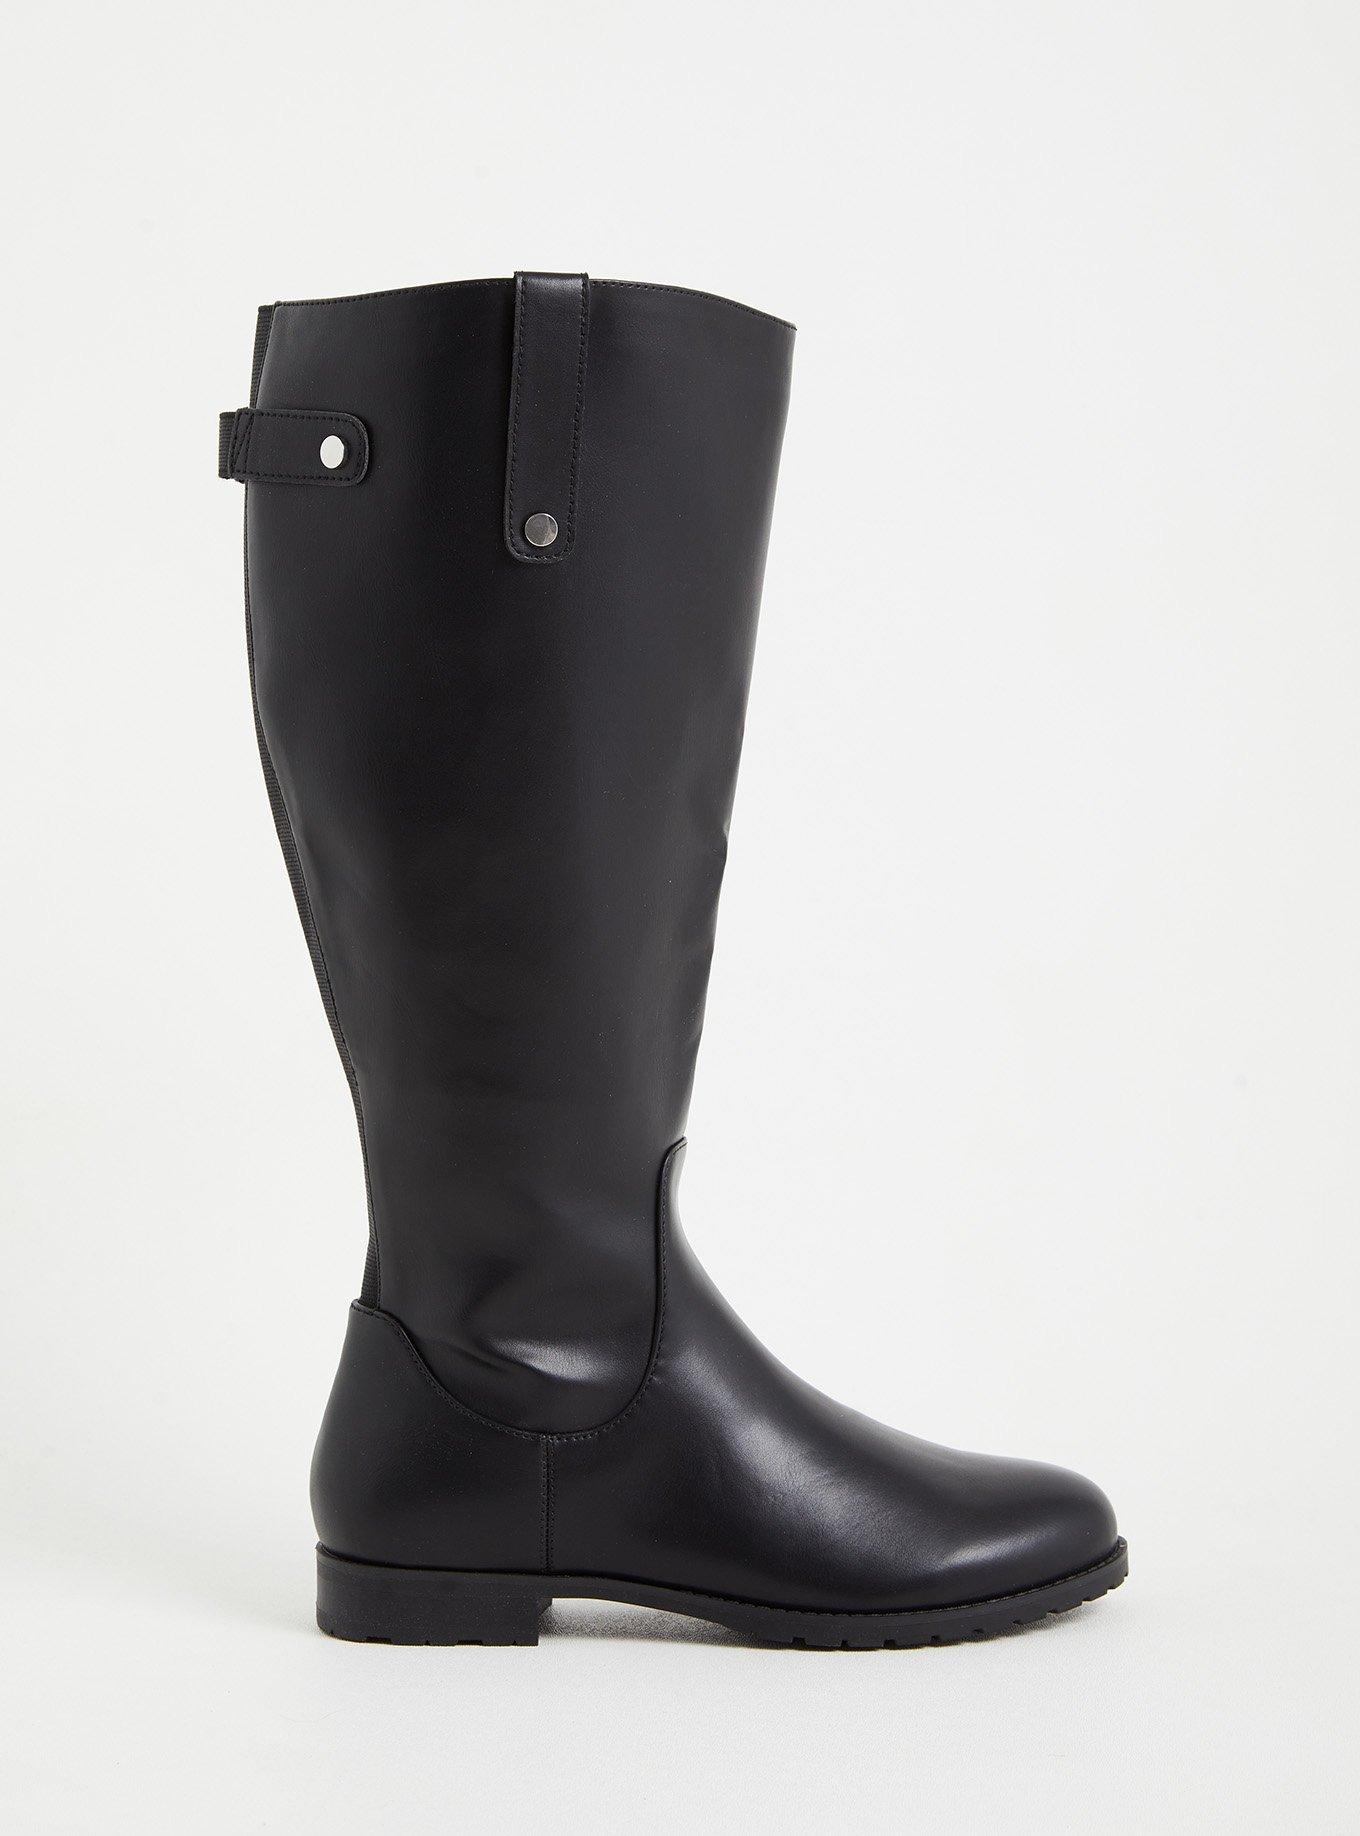 Plus Size - Black Faux Leather Knee-High Riding Boot (WW) - Torrid